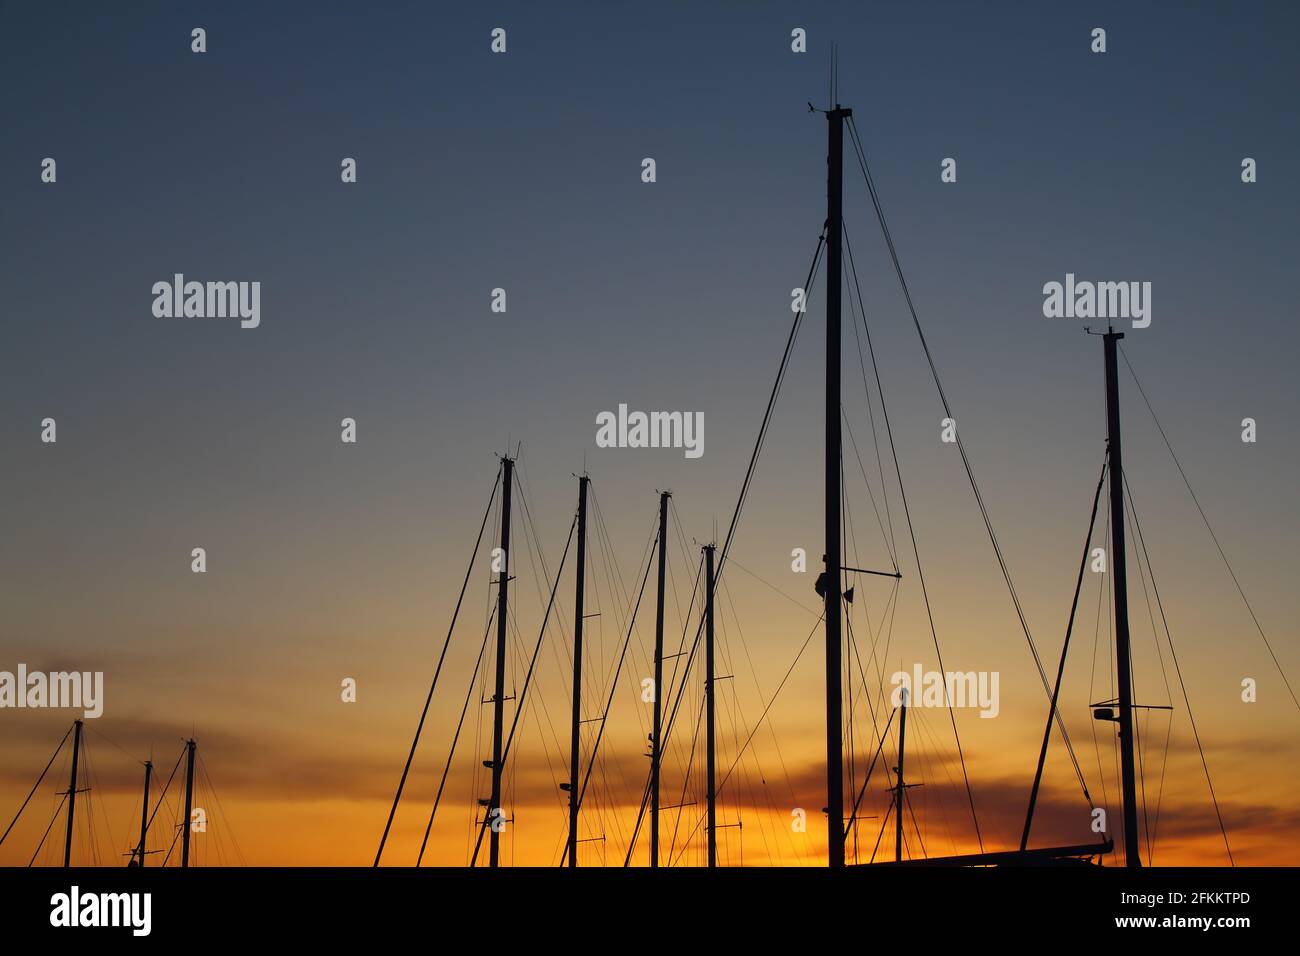 Fiery contrasting clouds in the blue sky, at sunset, through the masts of sailing yachts. Stock Photo